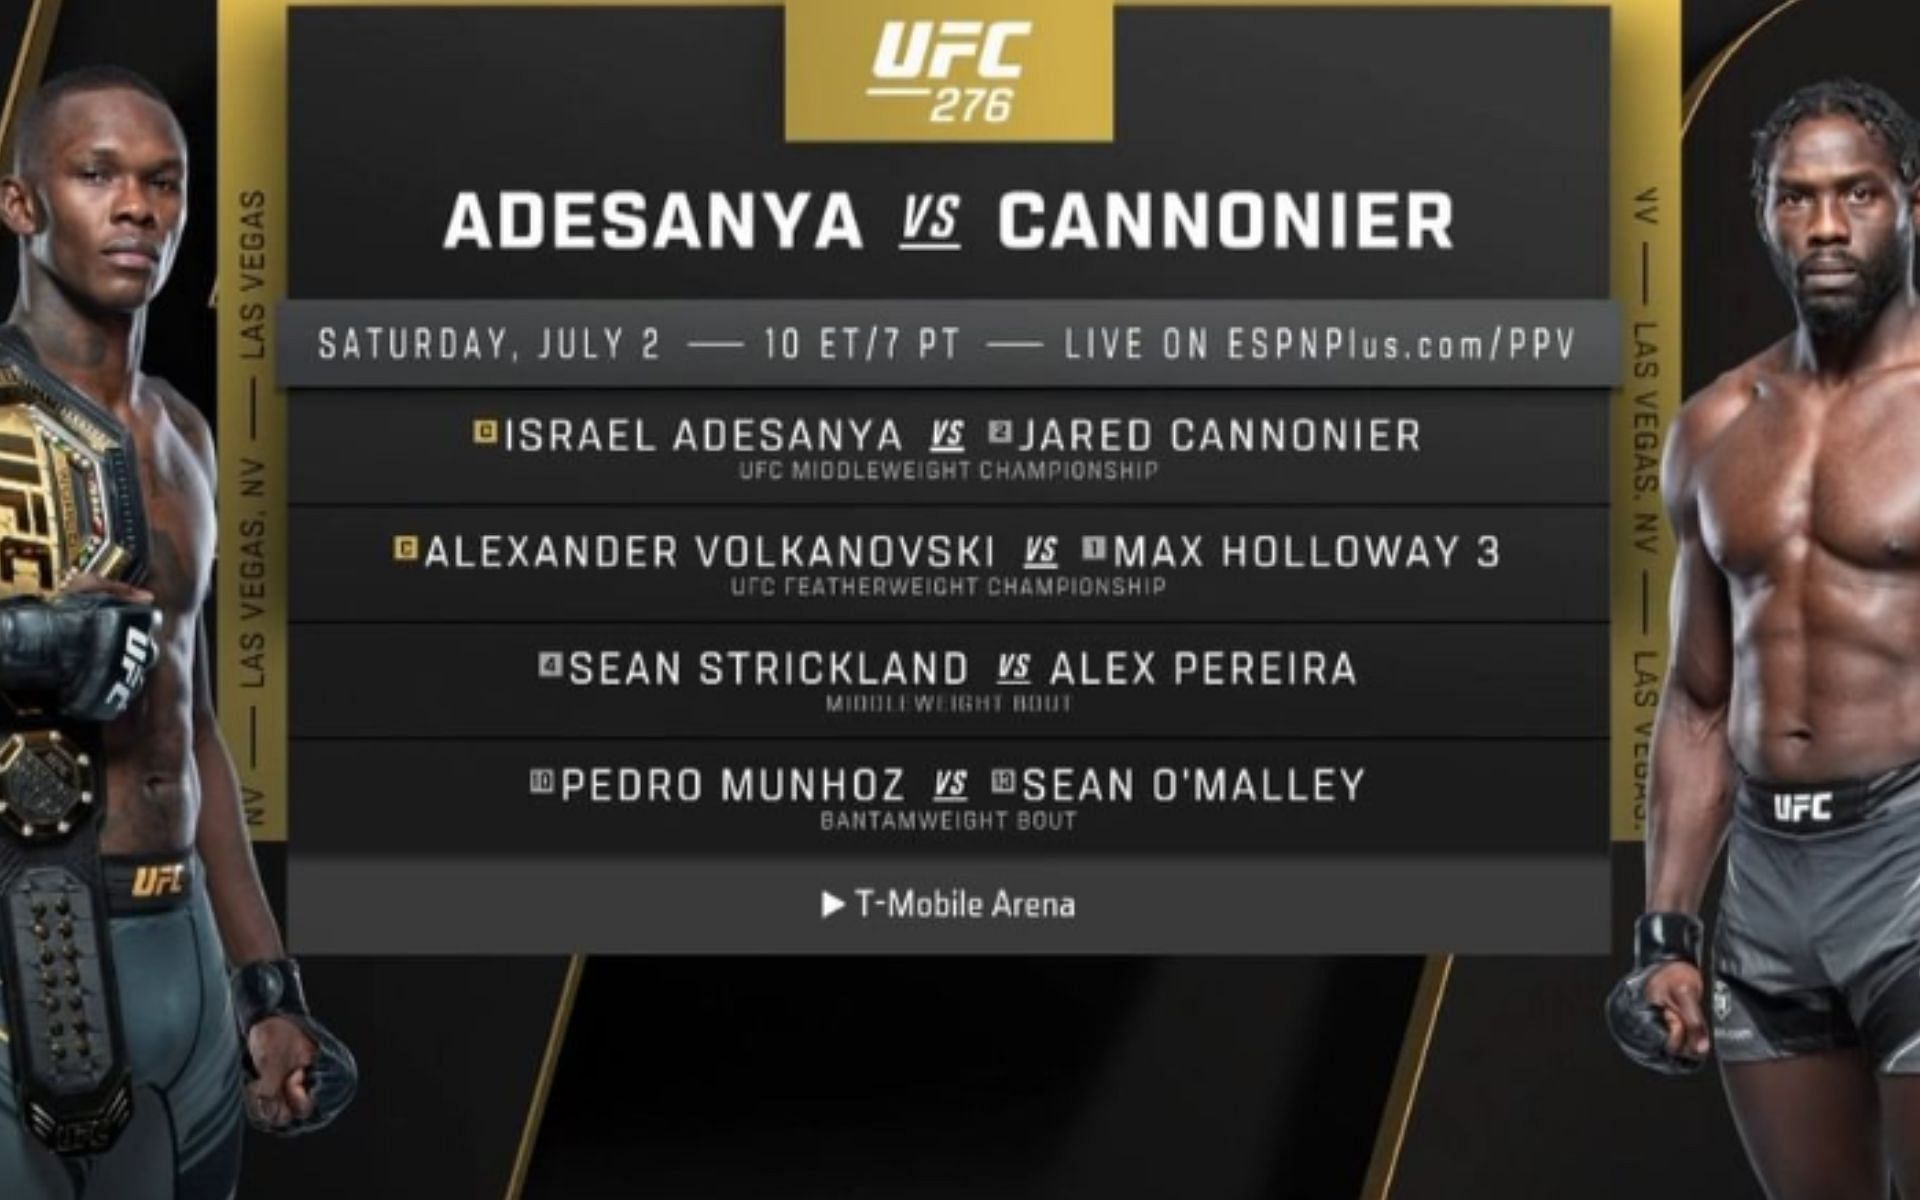 UFC 276 Promotional Graphic [Images courtesy of @UFC on Instagram]